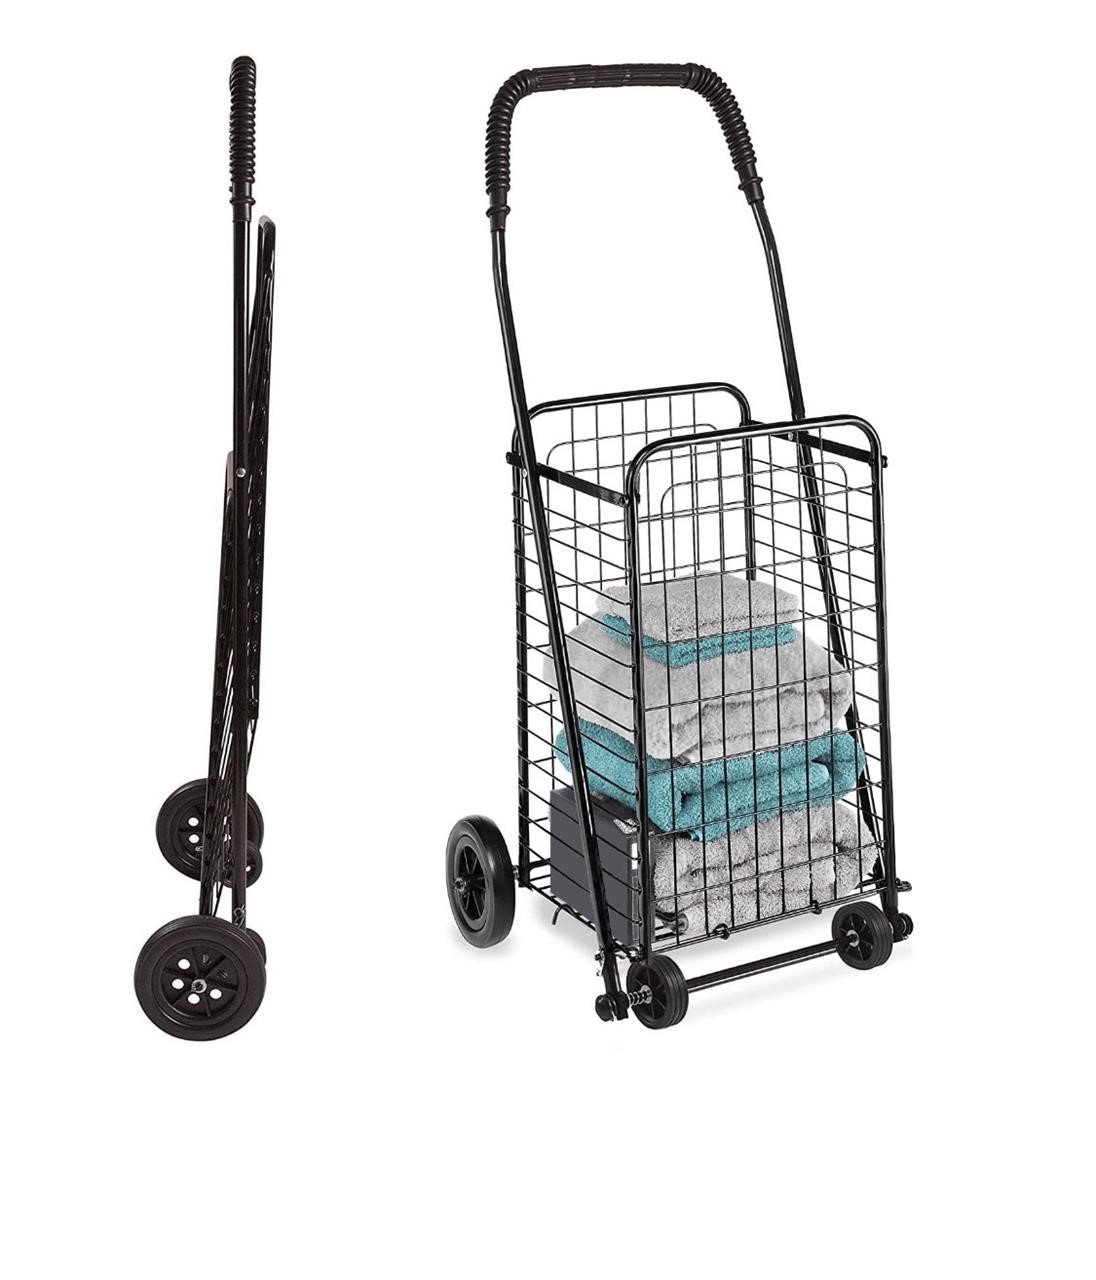 $50 DMI Utility Cart with Wheels Foldable,